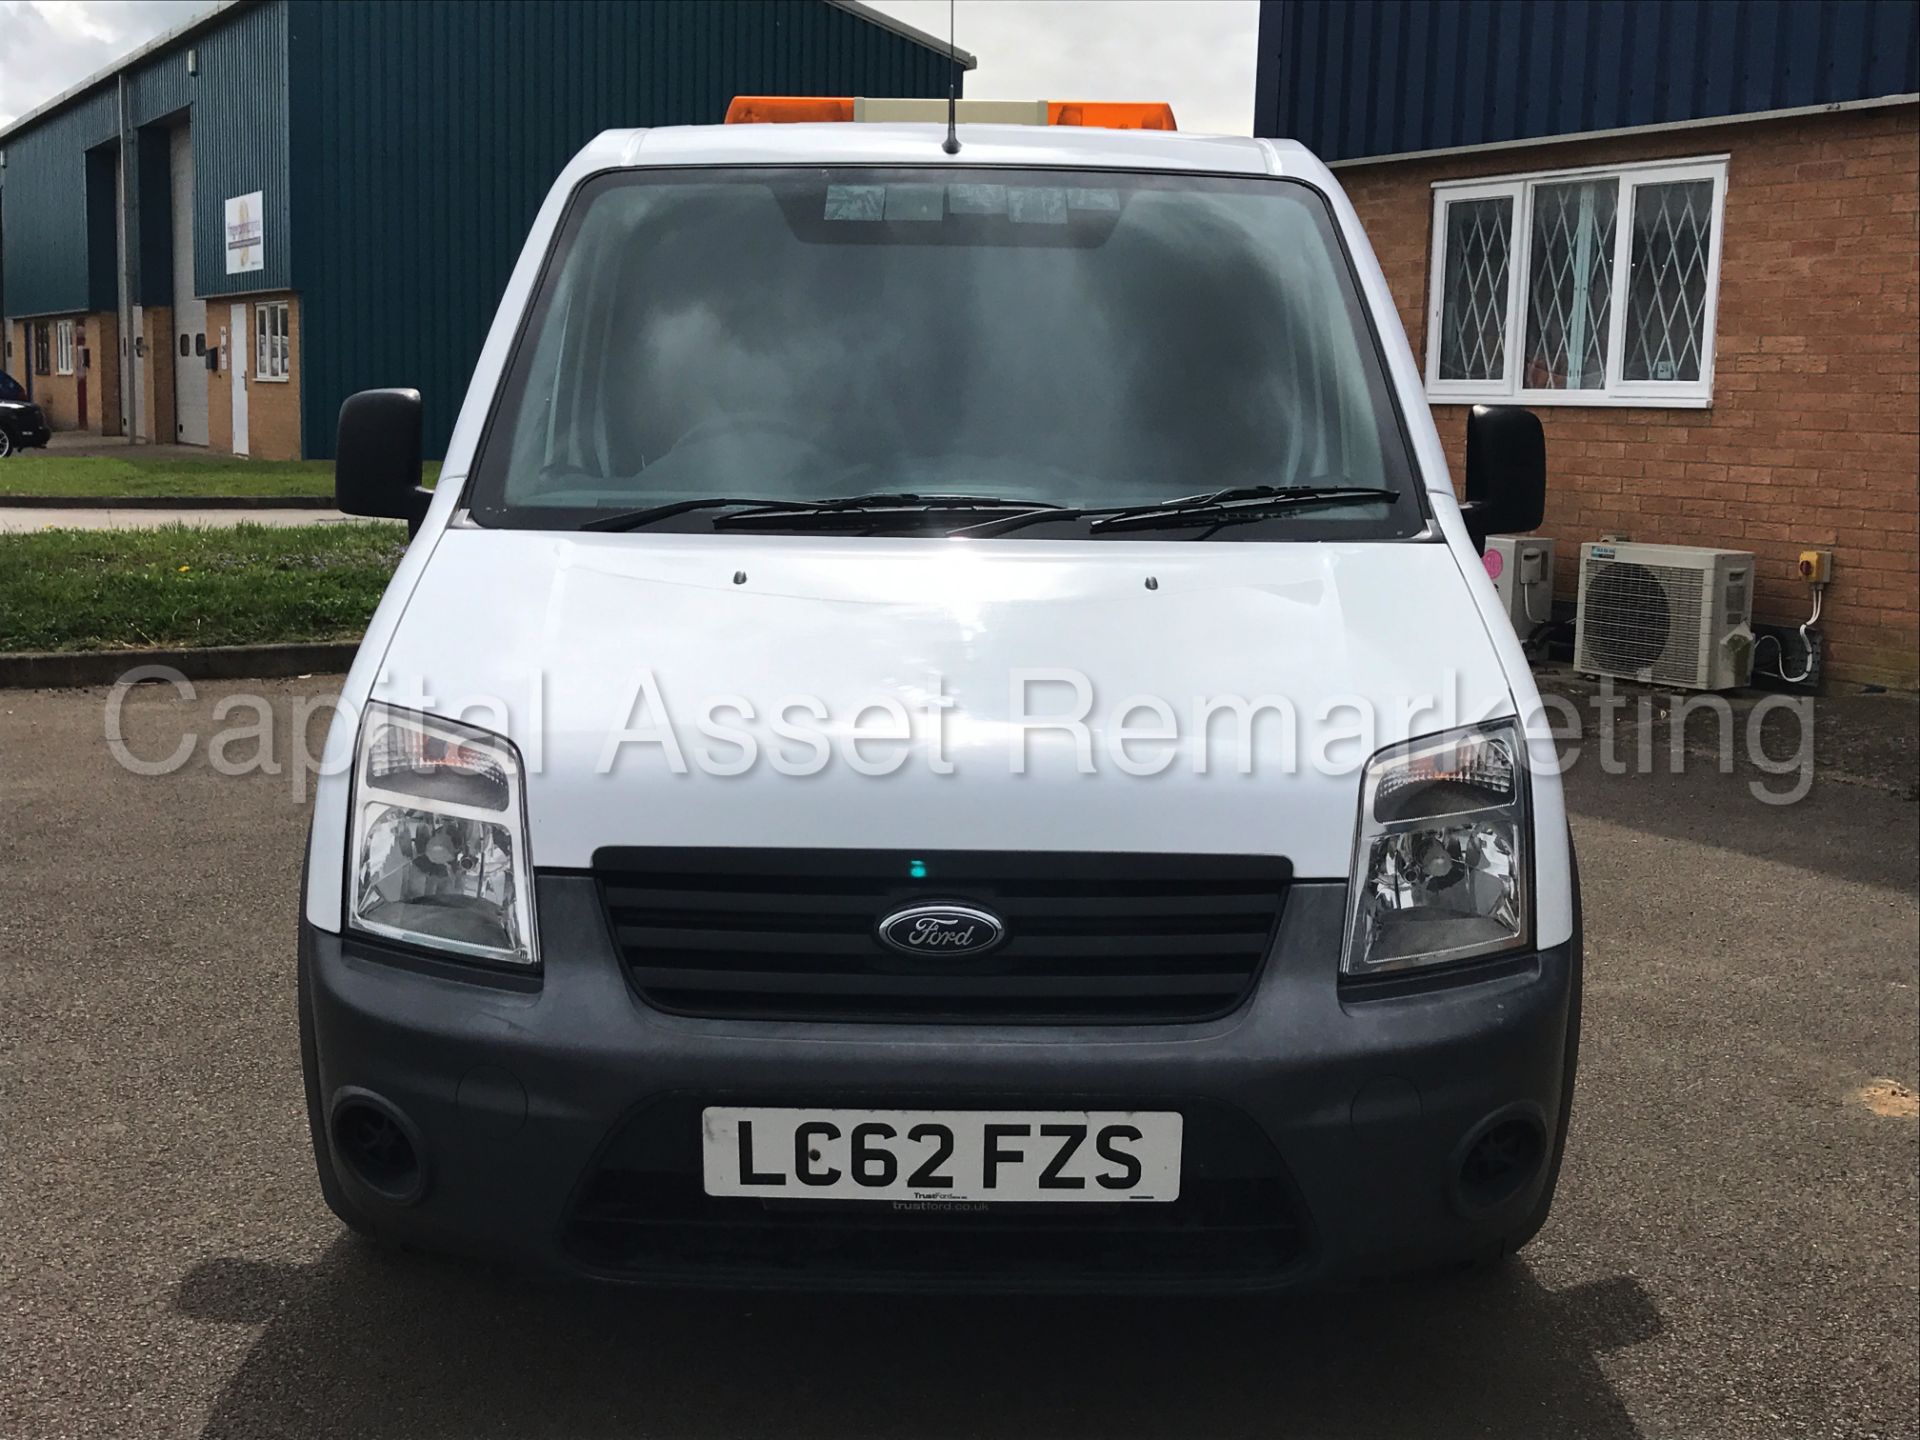 FORD TRANSIT CONNECT 90 T220 (2013 MODEL) '1.8 TDCI - 5 SPEED' *AIR CON* (1 COMPANY OWNER) - Image 3 of 24